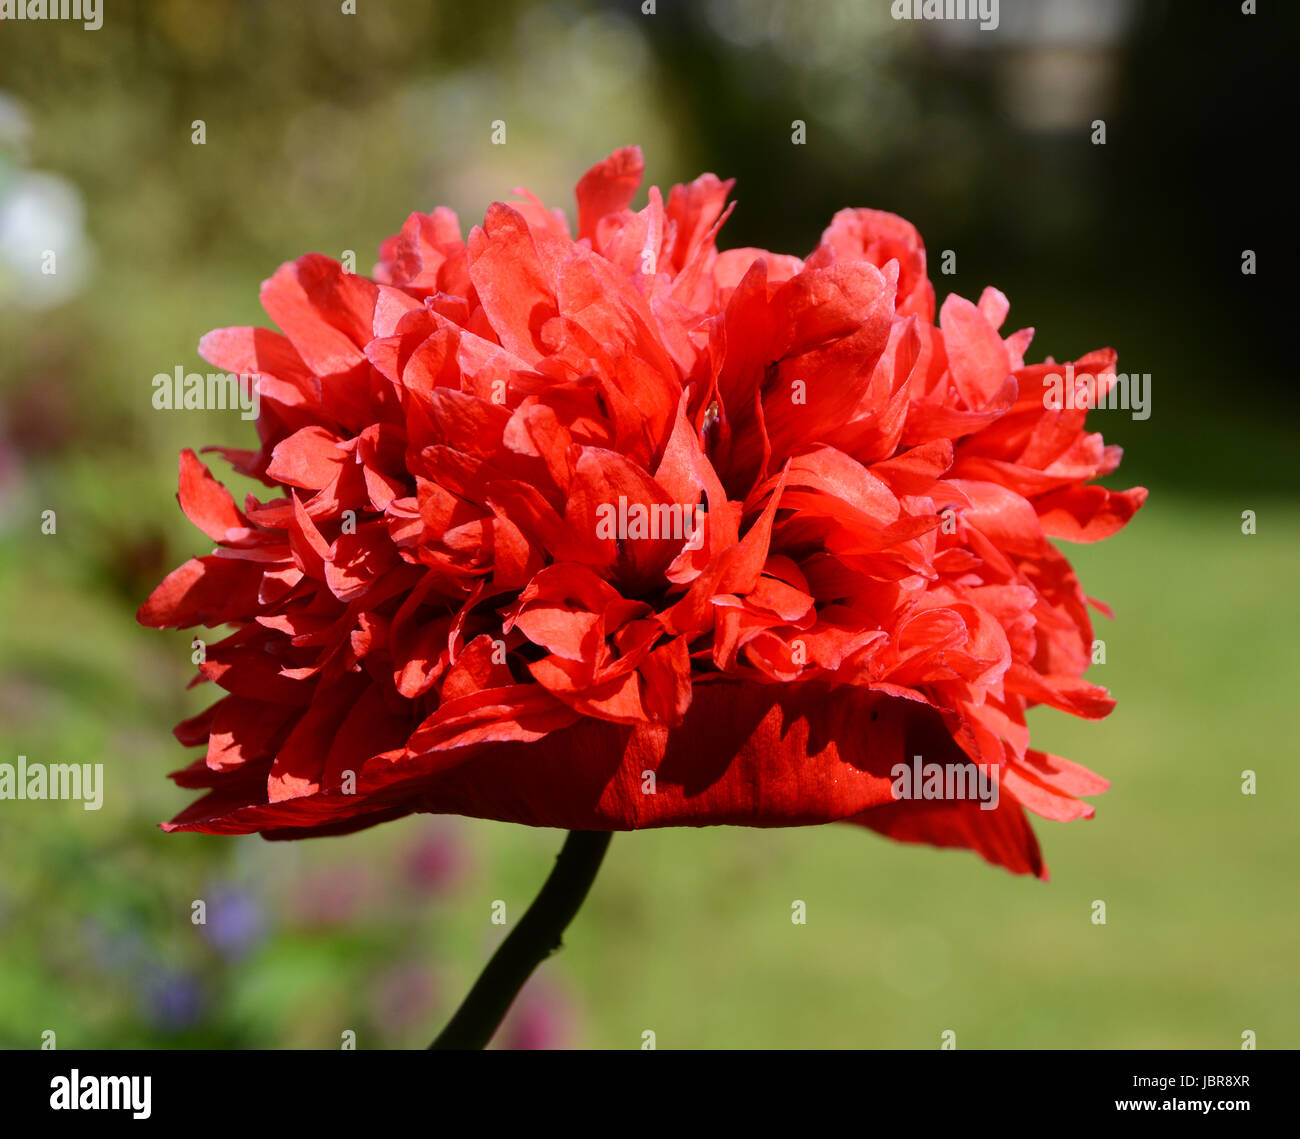 Close-up of red peony poppy with frilly petals Stock Photo